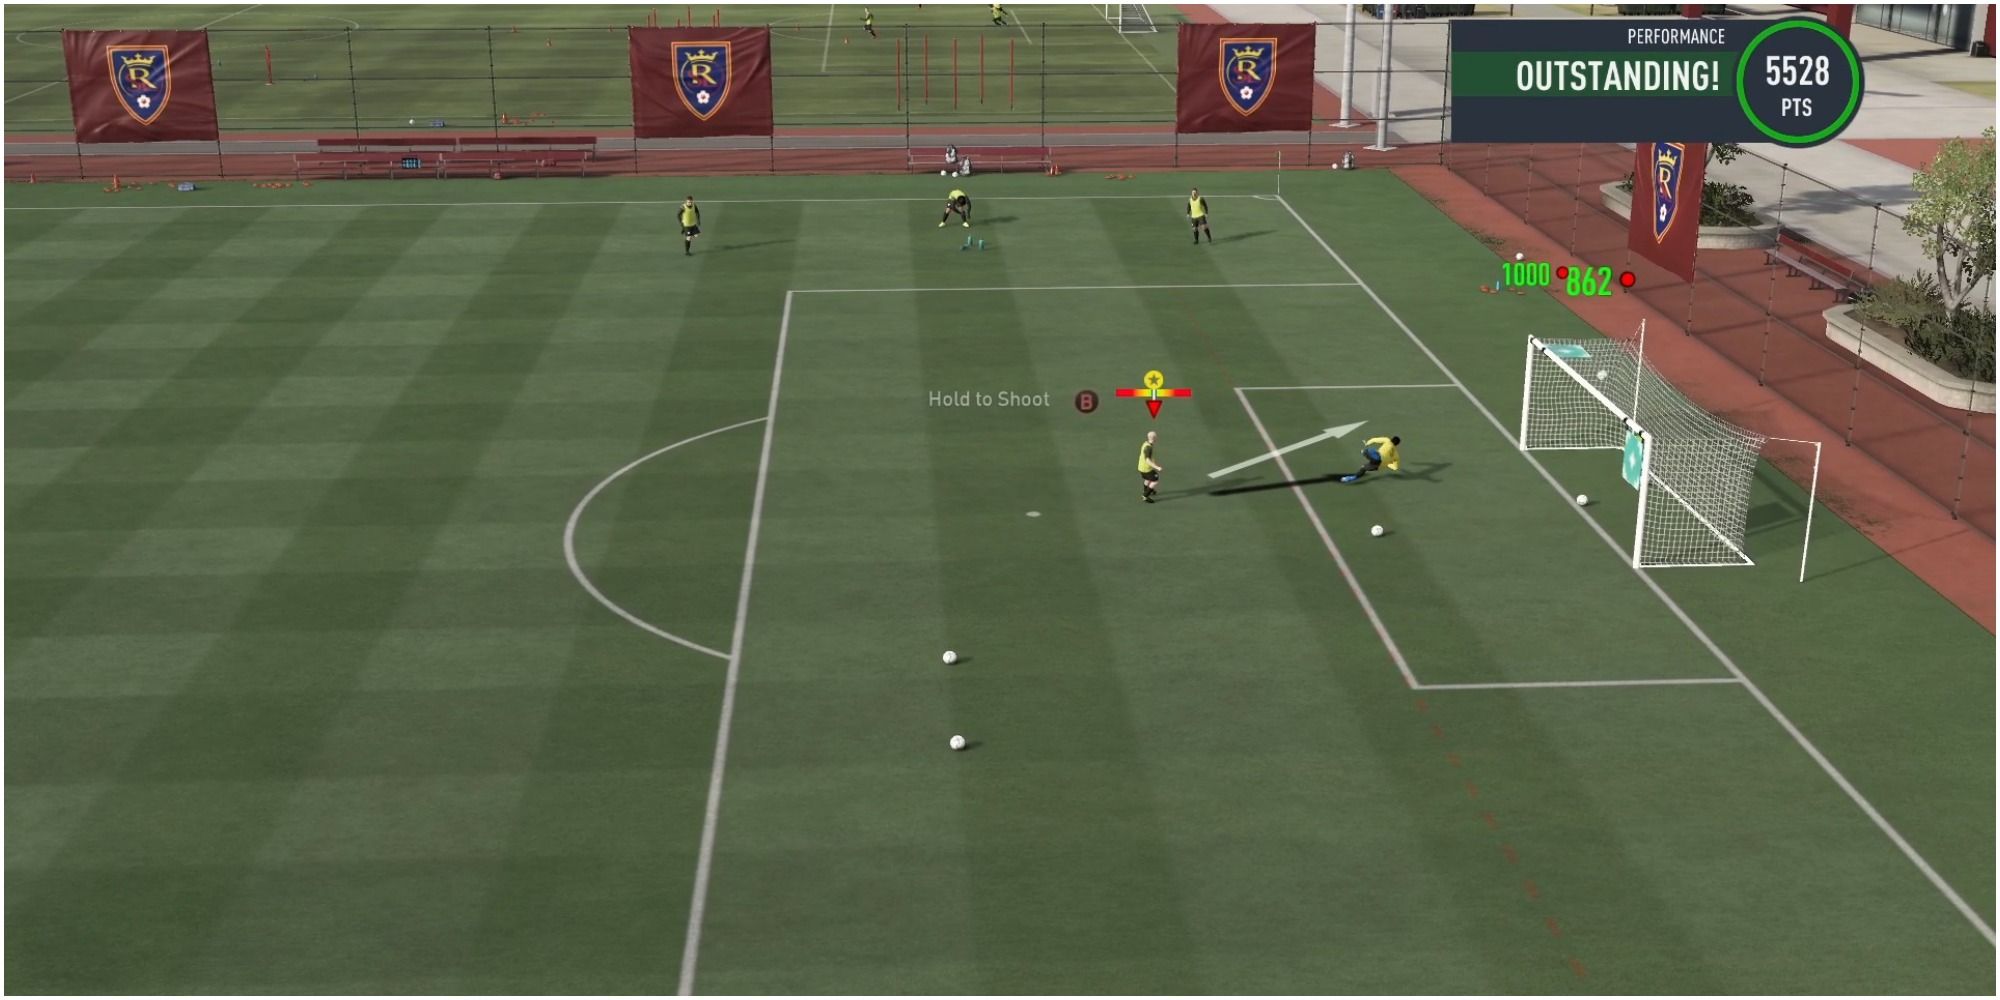 FIFA 22 Getting An Outstanding Score In A Shooting Drill